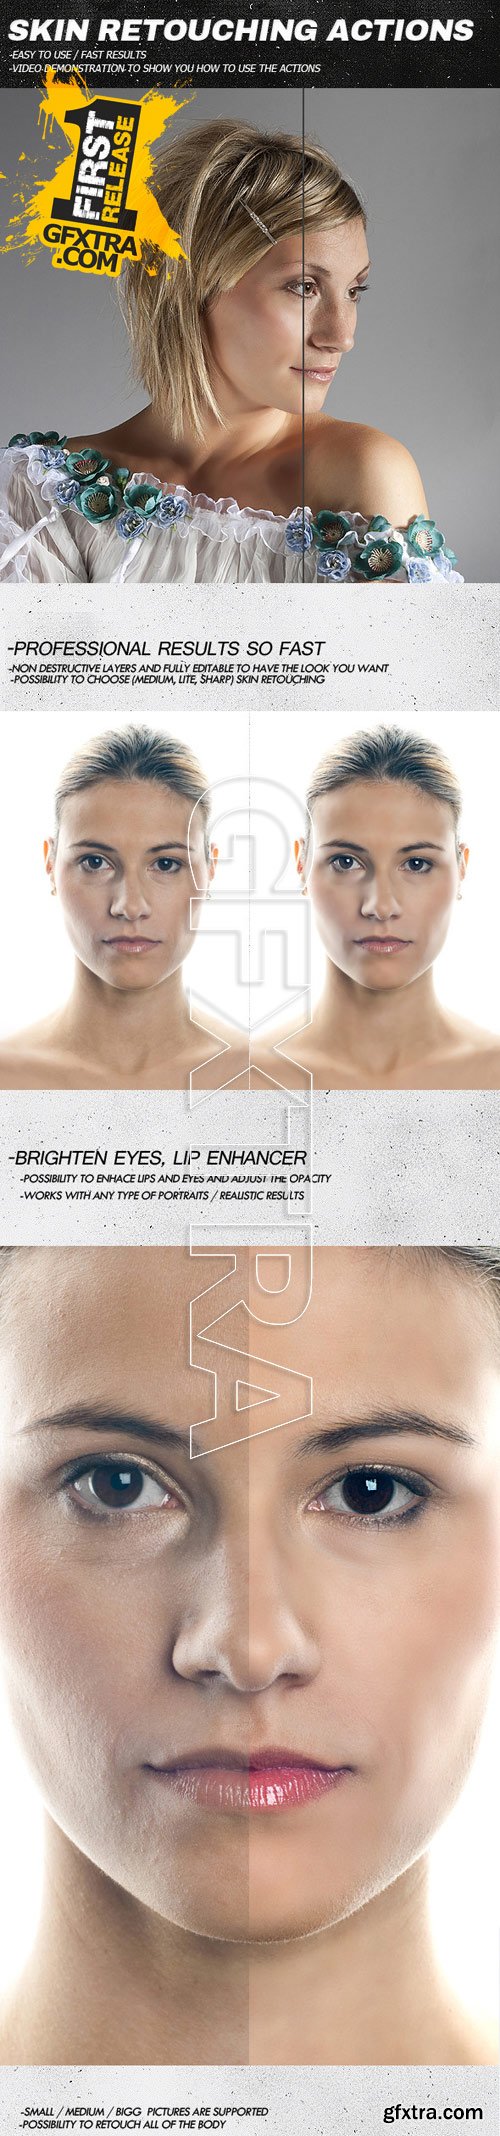 GraphicRiver - Skin Retouching Actions 10961874